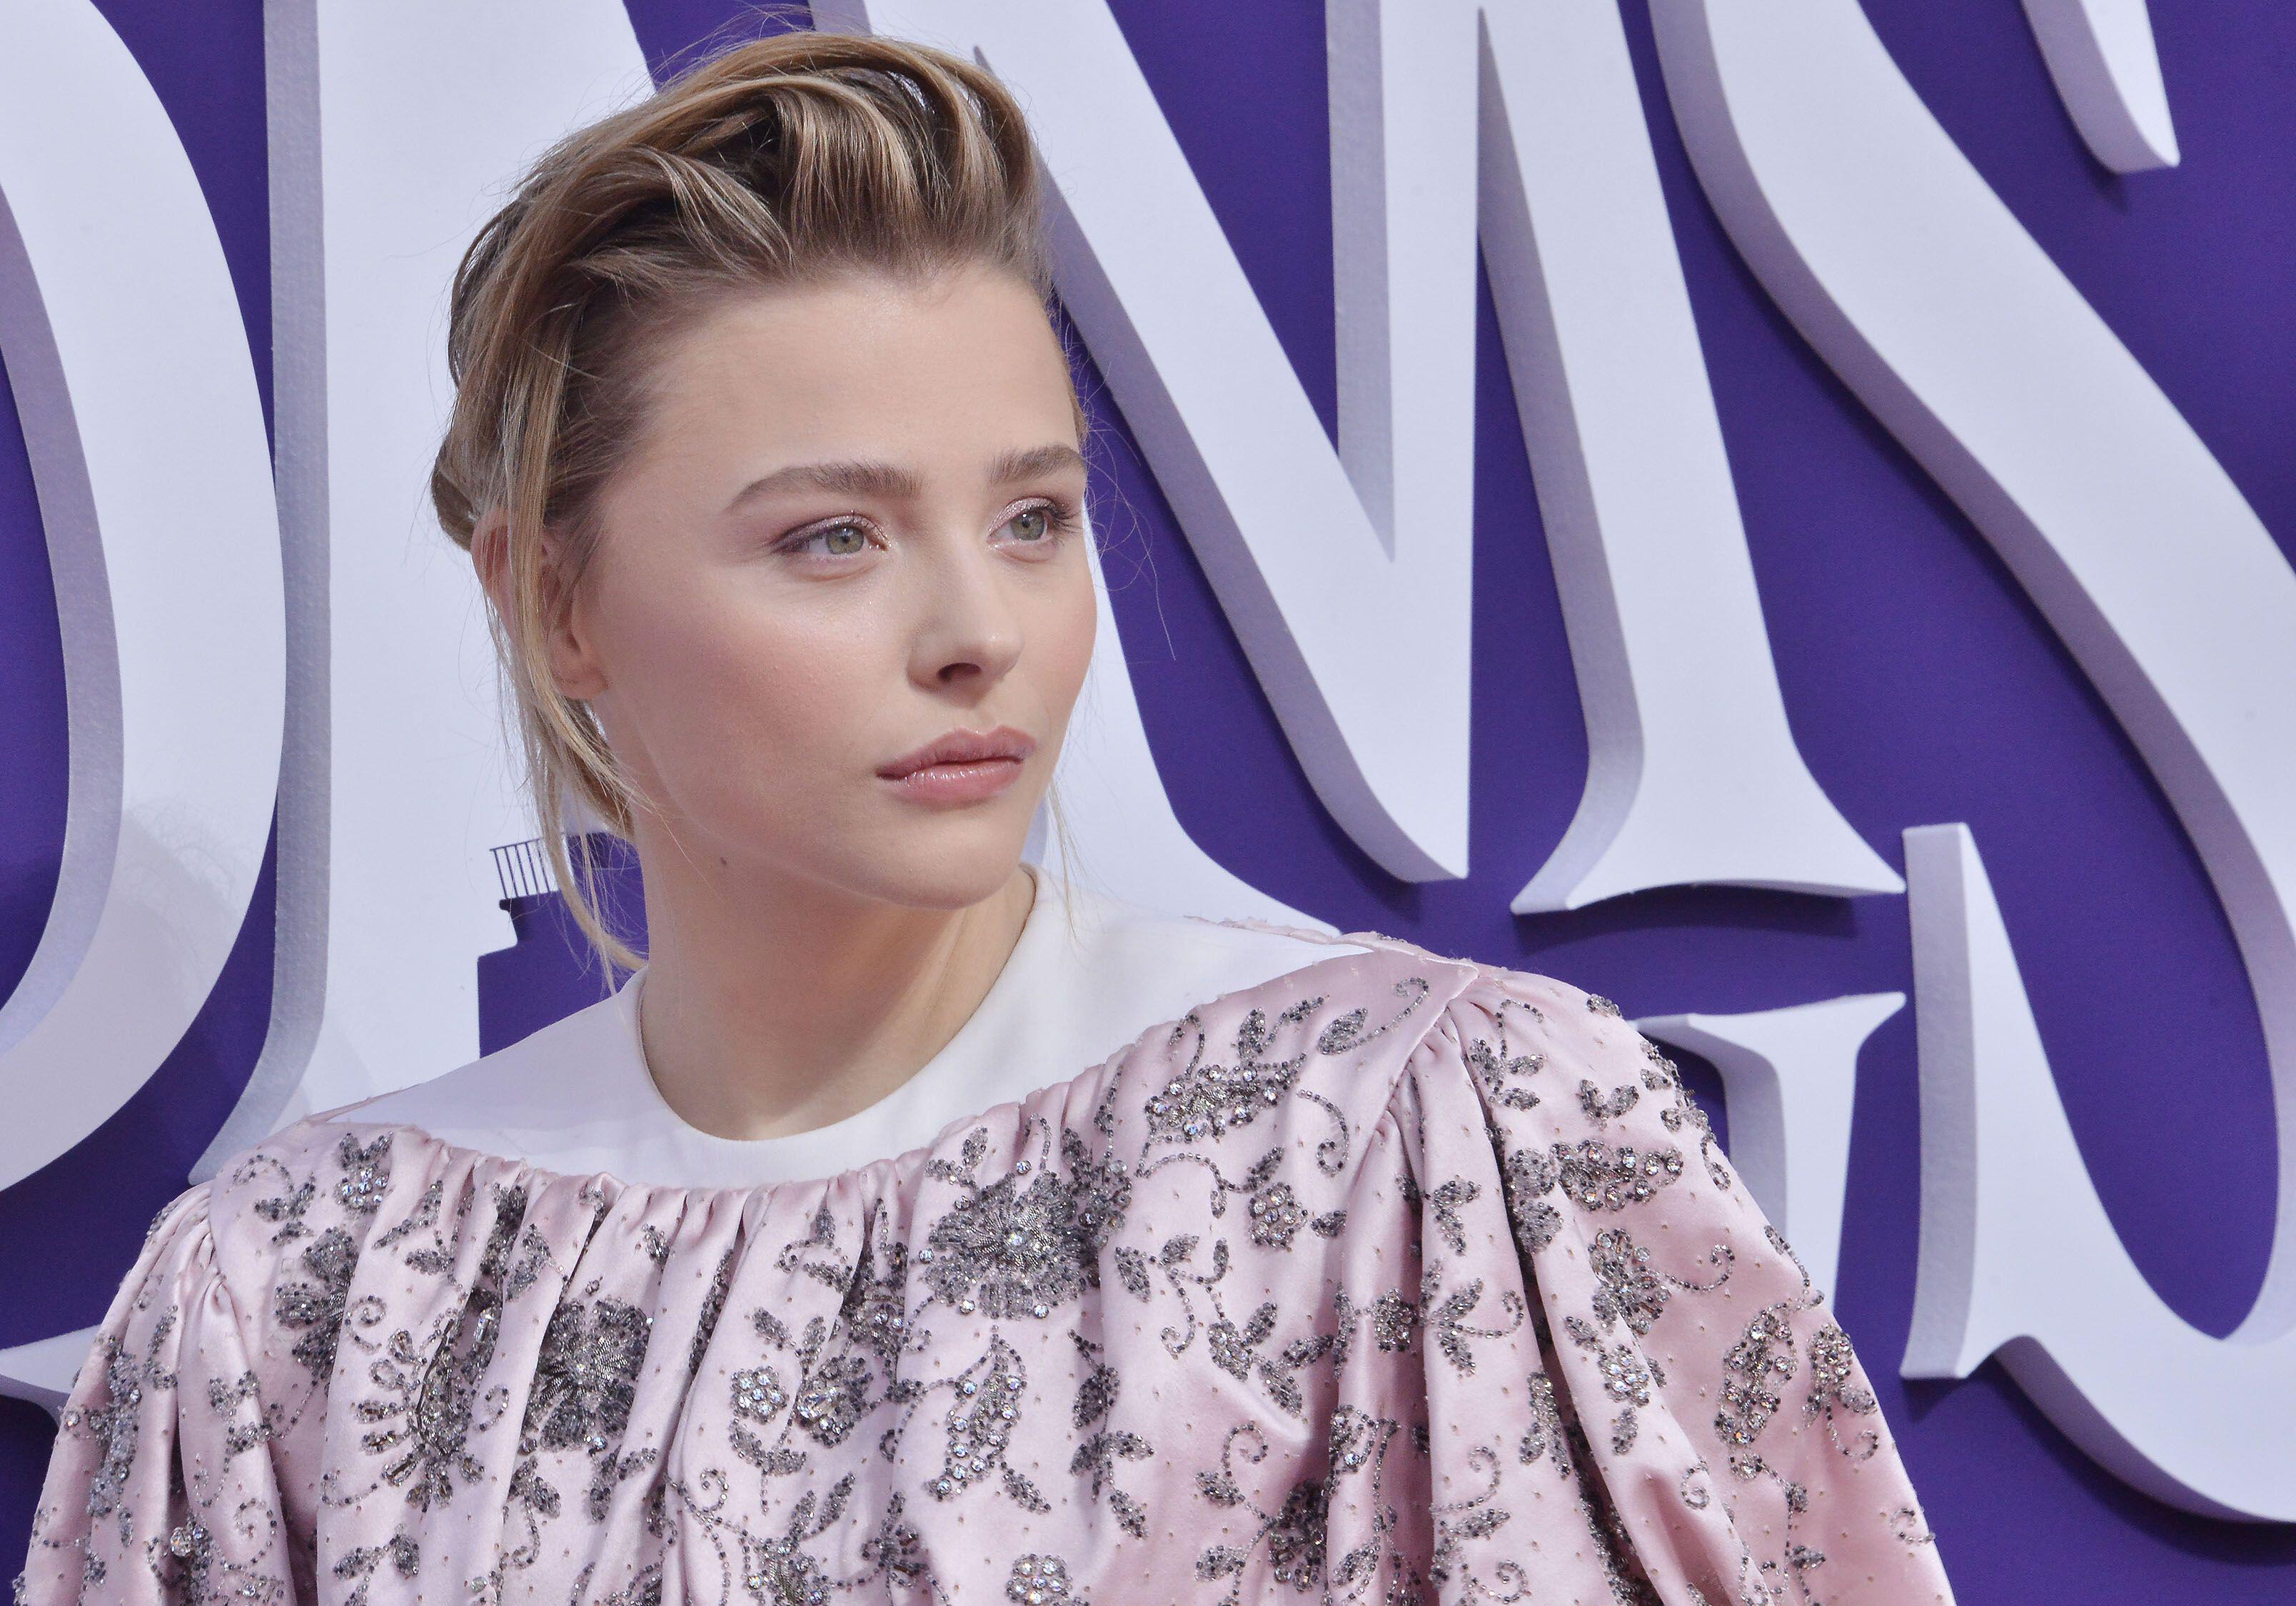 Chloe Grace Moretz says she became a 'recluse' after viral Family